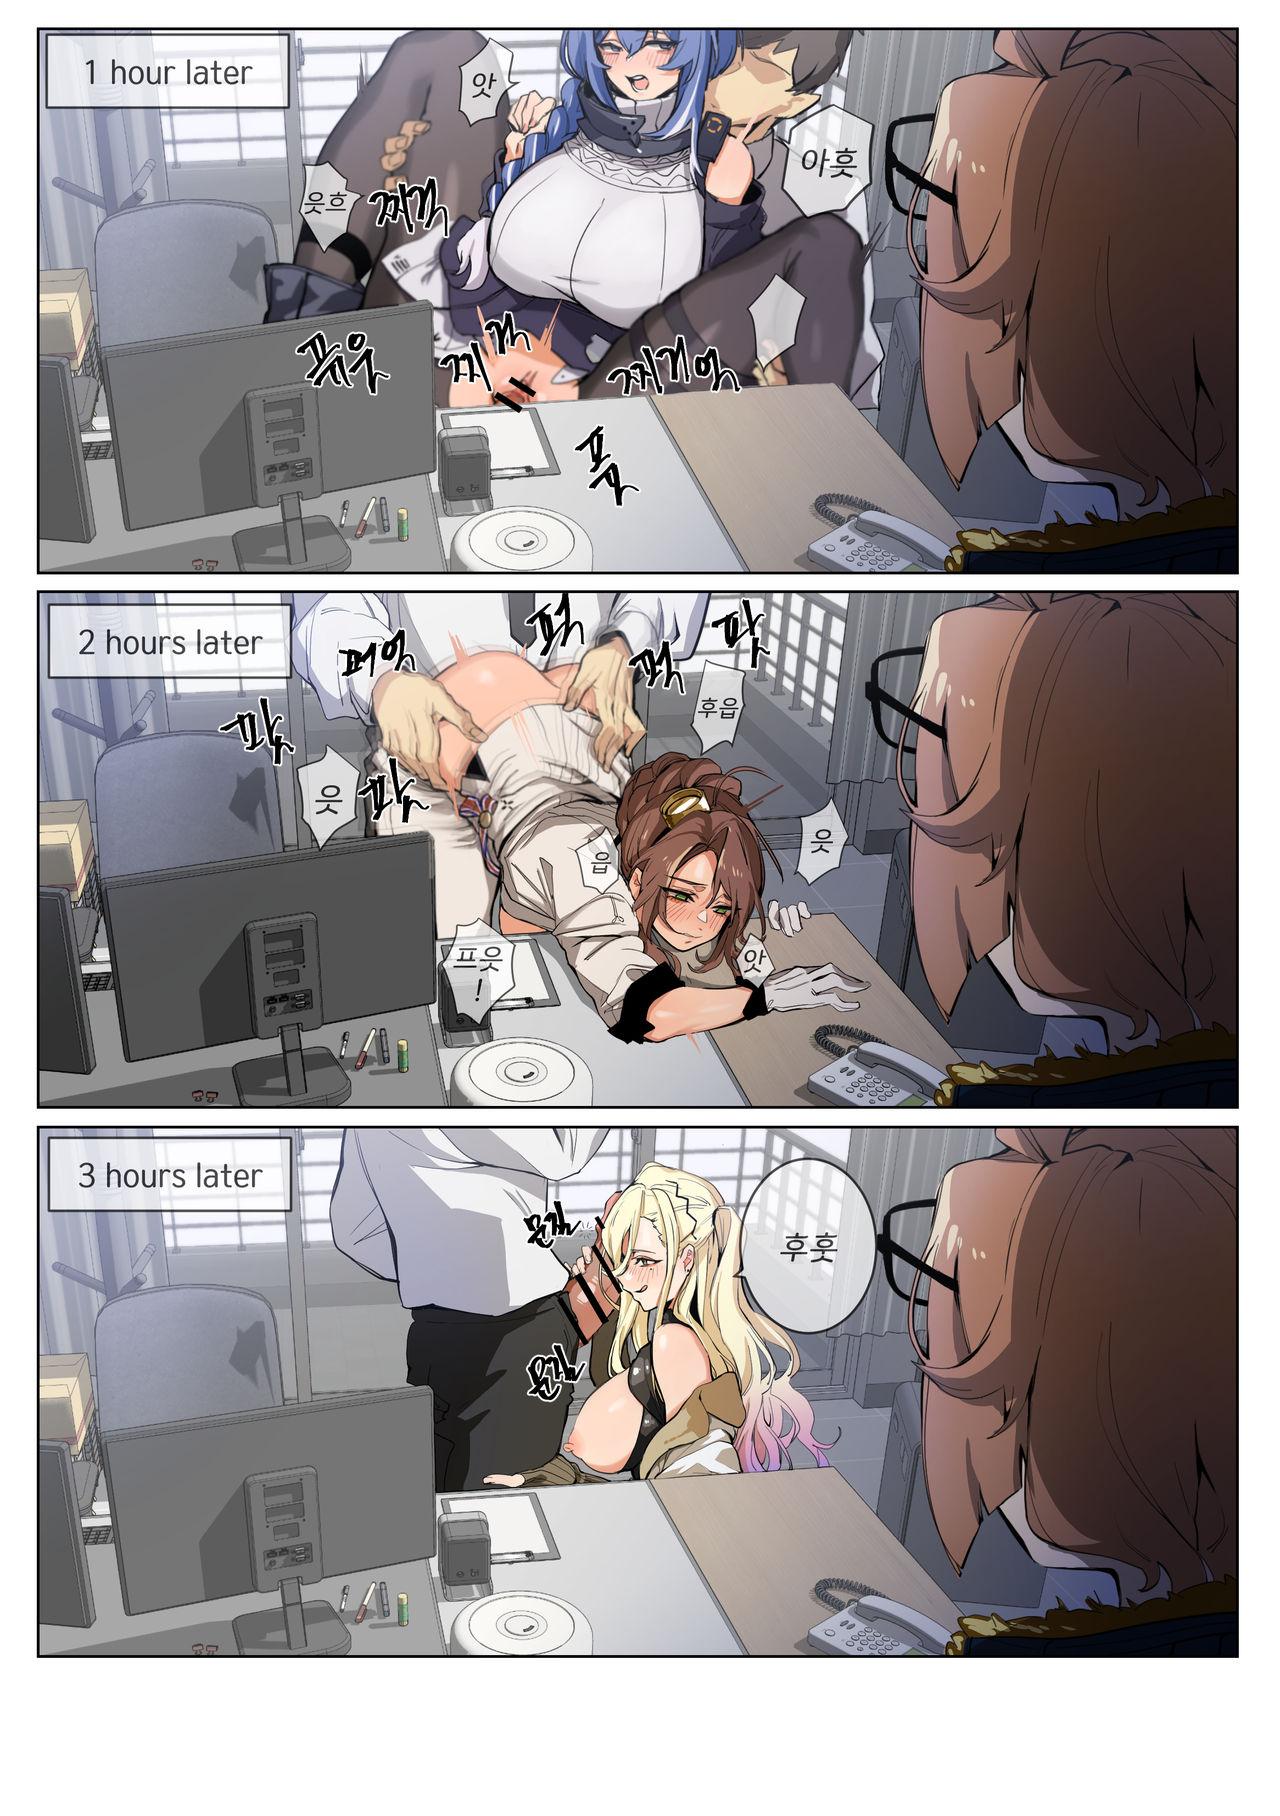 Casal Grizzly - Girls frontline Indonesia - Page 4